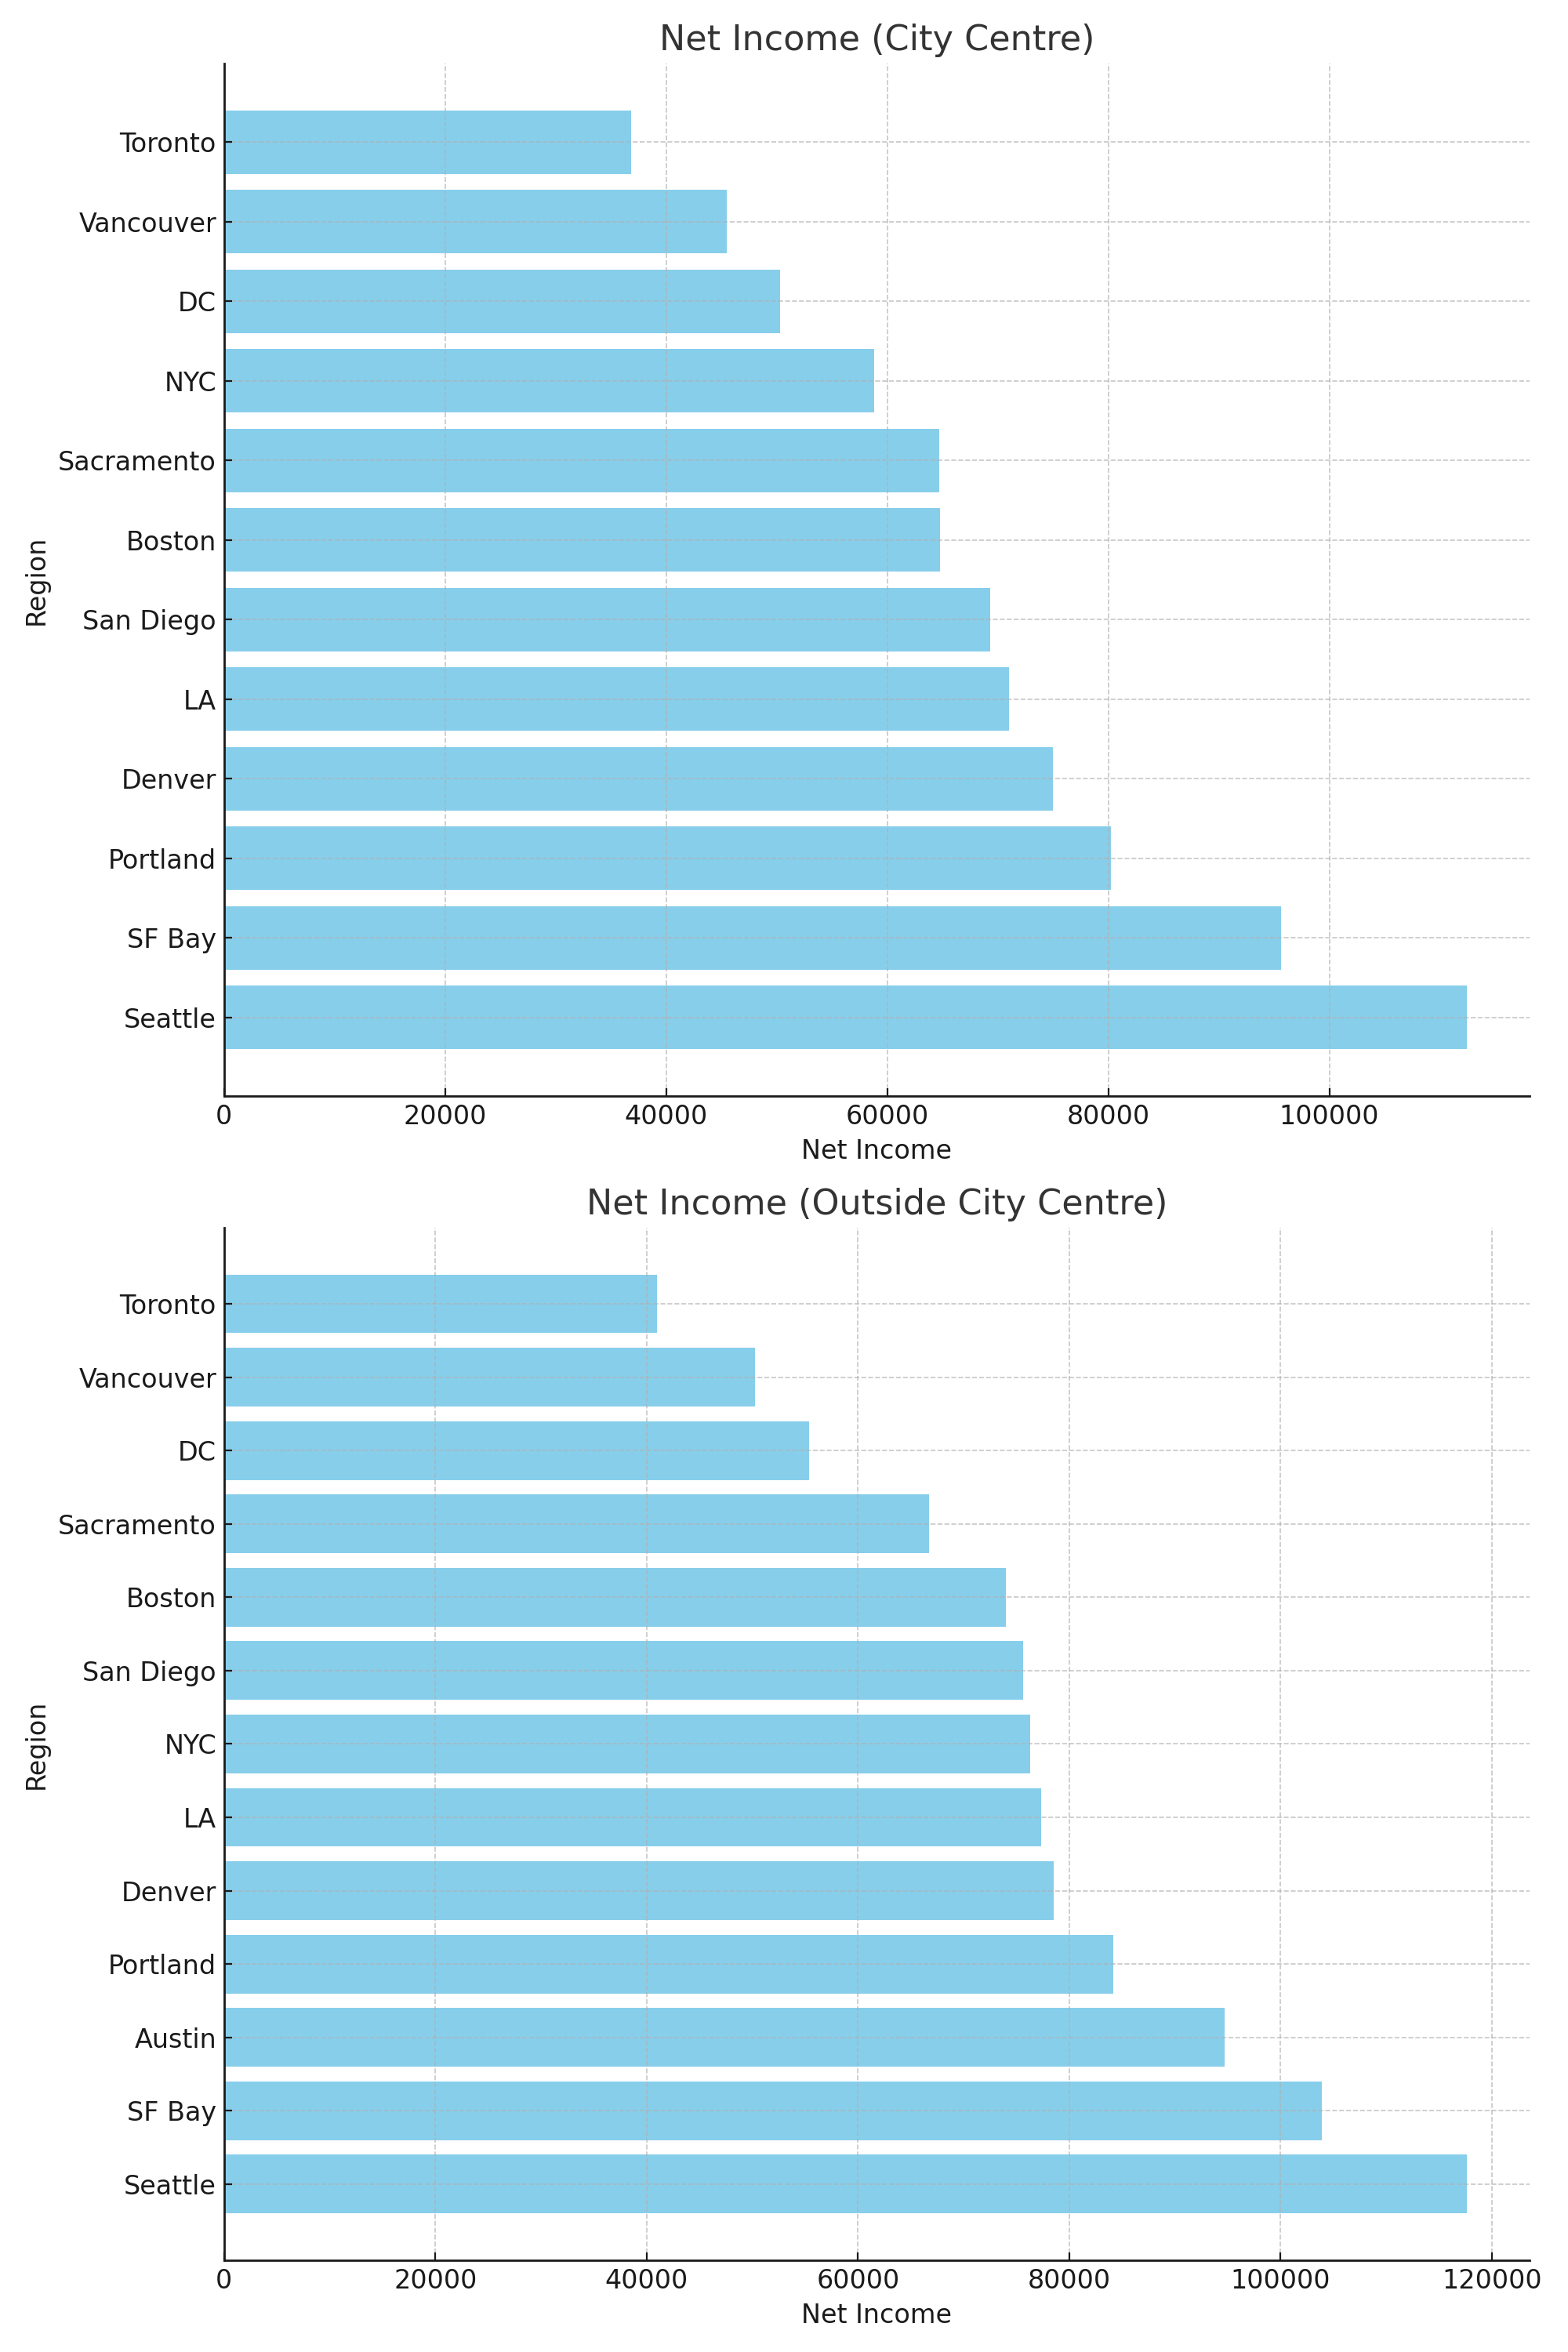 2 bar charts showing how salaries compare across a selection of American and Canadian cities